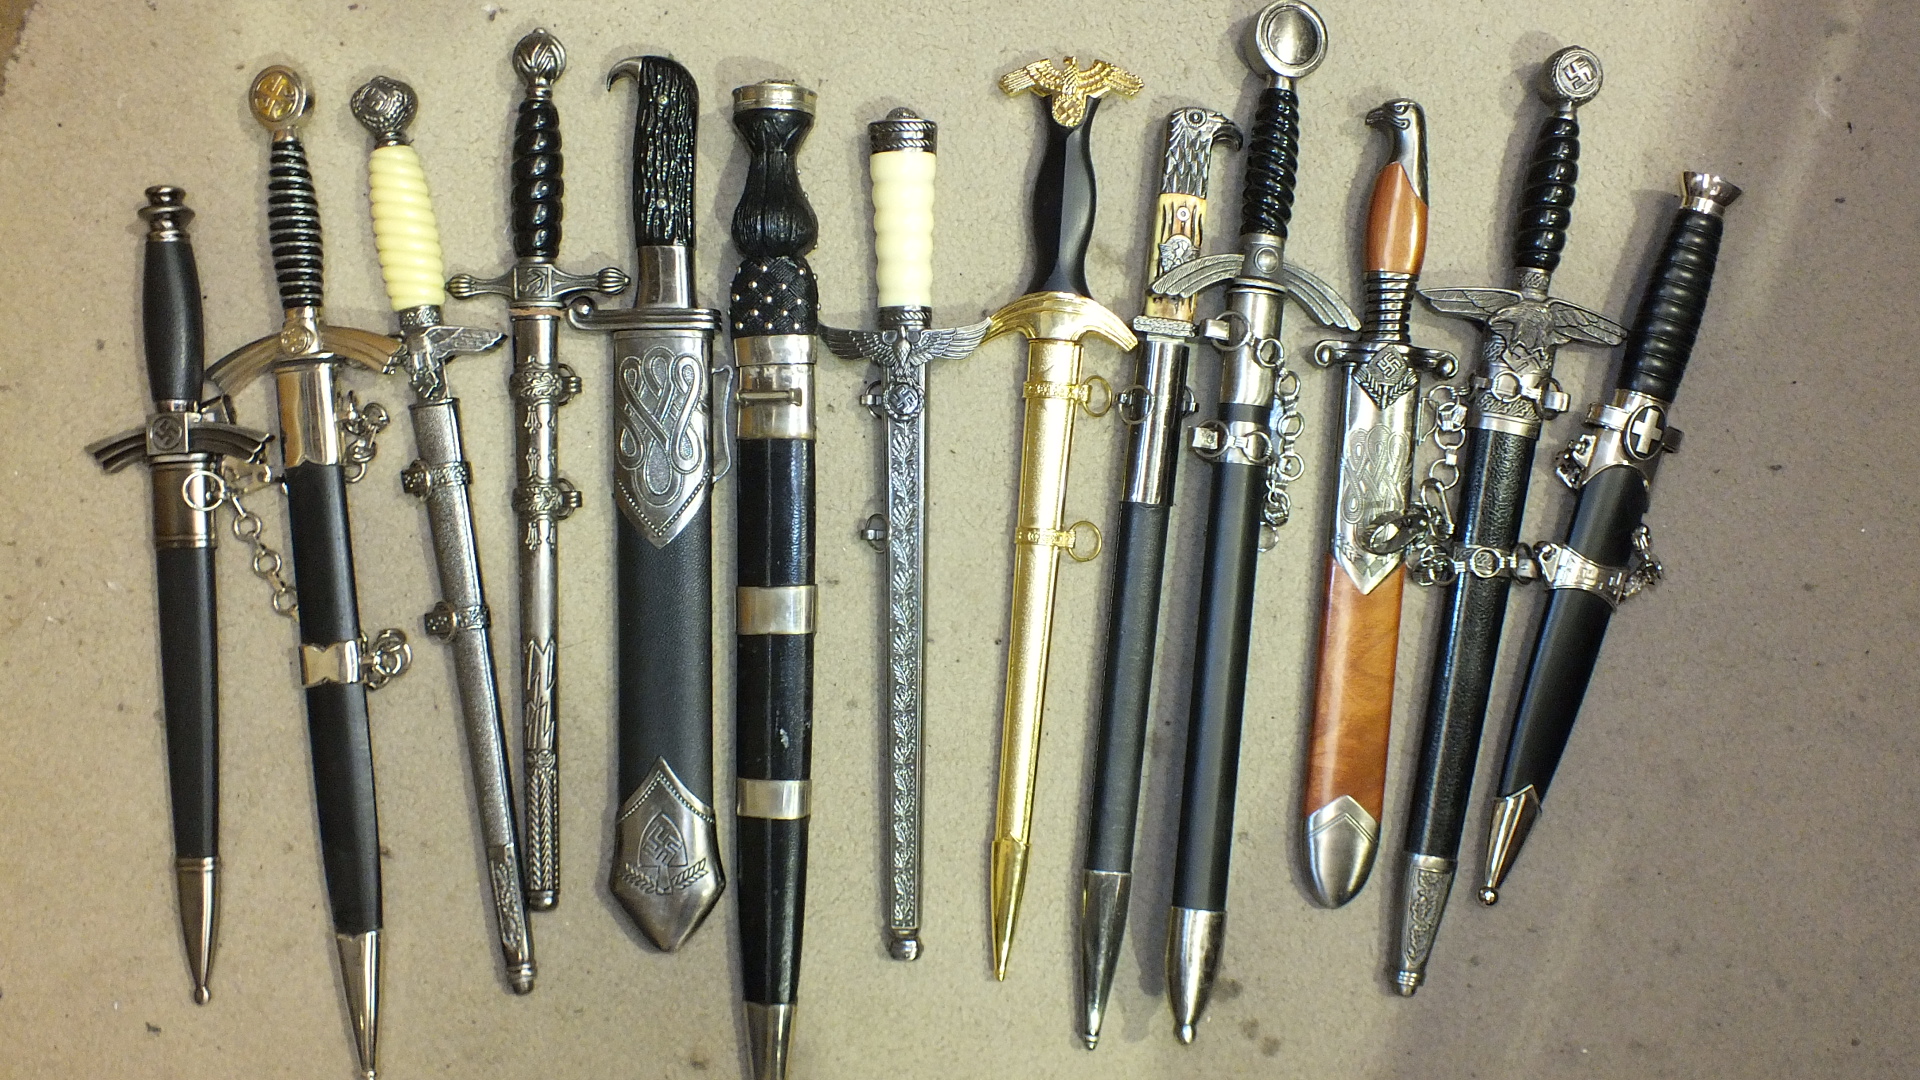 A collection of thirteen reproduction German military dirks and daggers, (13).